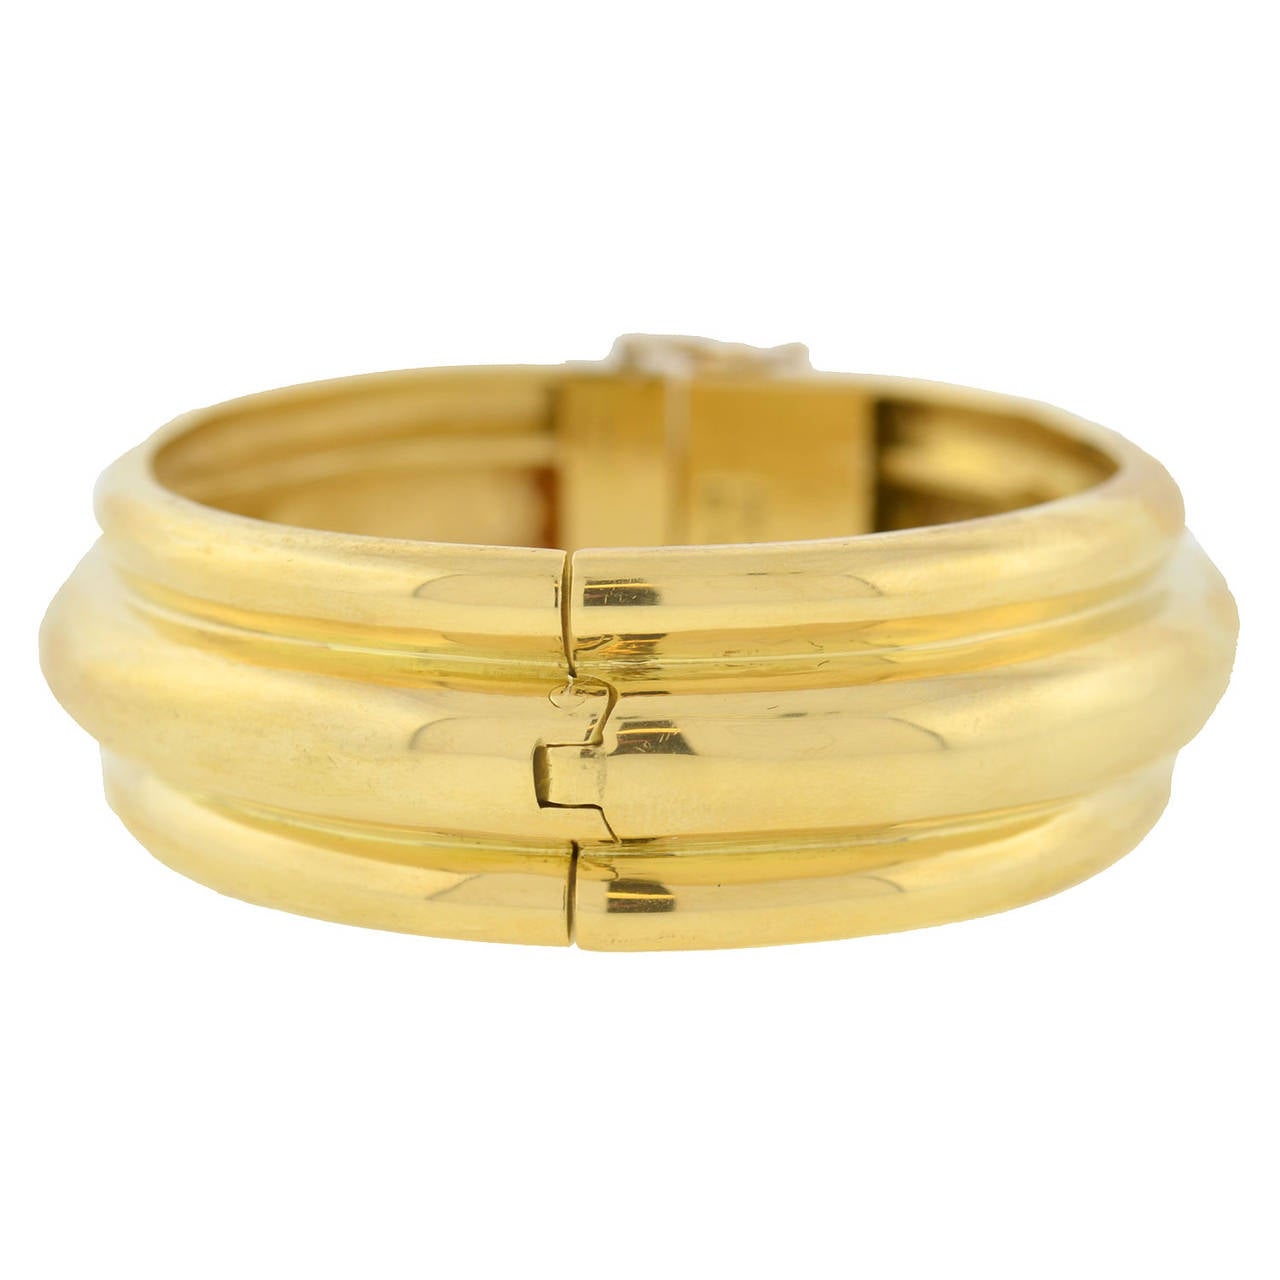 A fabulous yellow gold Estate bangle bracelet! This gorgeous piece is made of vibrant 18kt yellow gold and features an attractive grooved design that runs all the way around the piece with a raised gold area in the center. The bracelet is hinged and